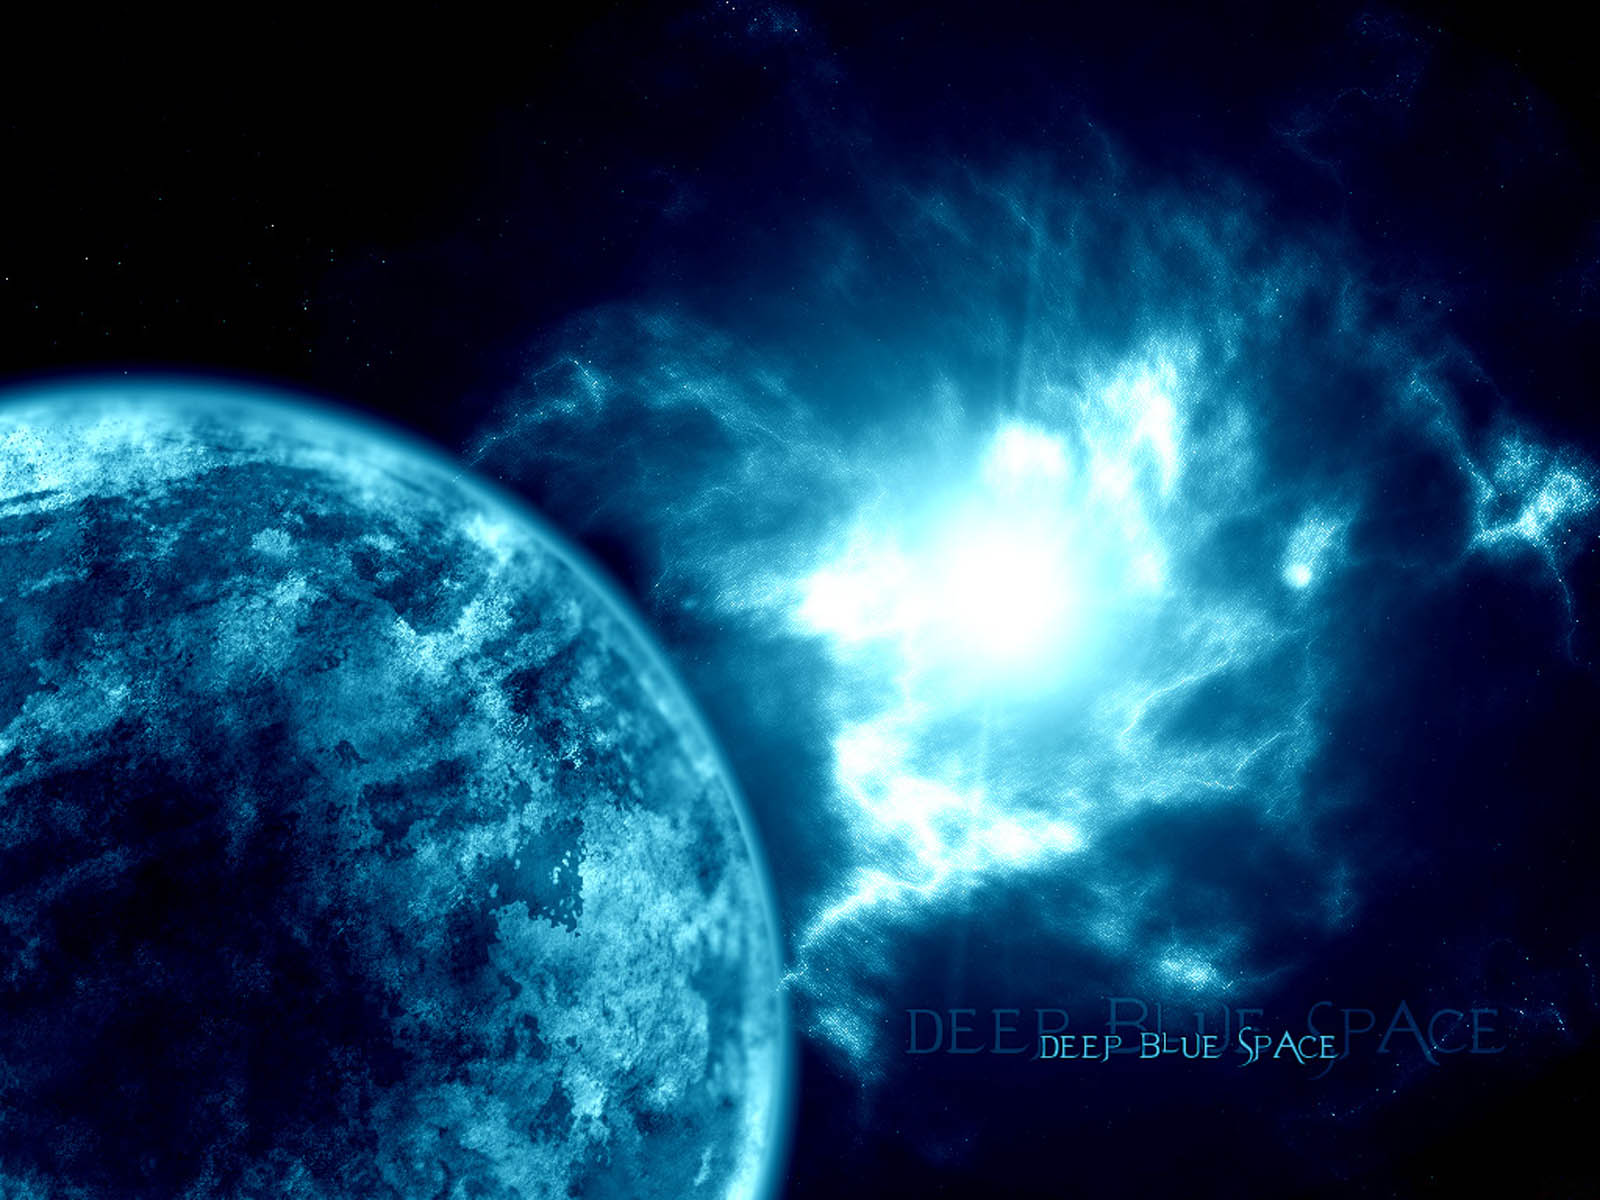 Tag Blue Space Wallpaper Image Paos Pictures And Background For